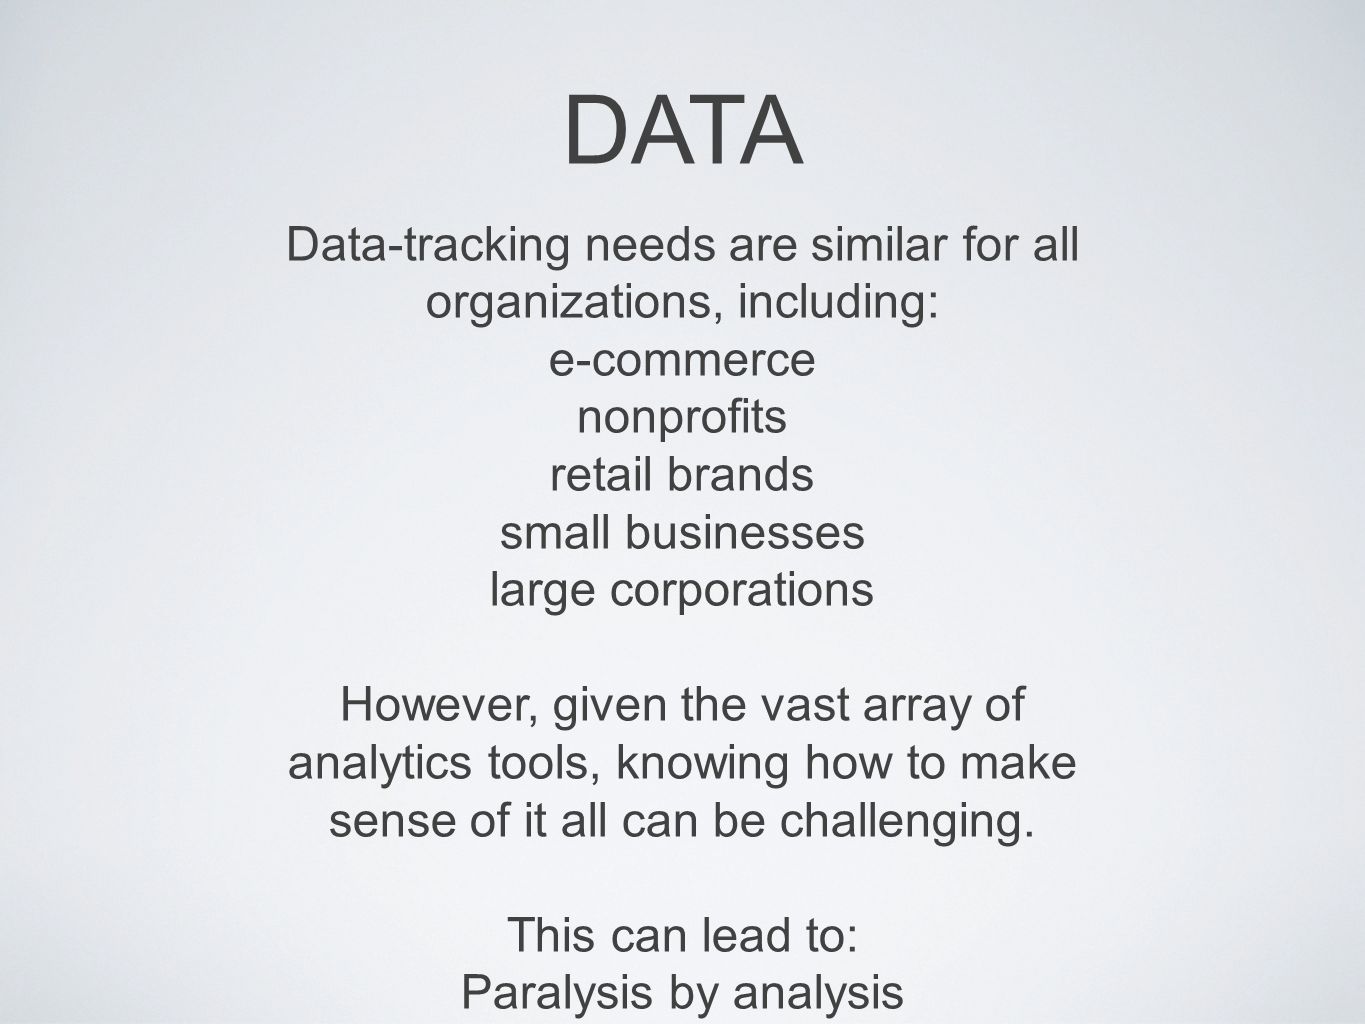 Data-tracking needs are similar for all organizations, including: e-commerce nonprofits retail brands small businesses large corporations However, given the vast array of analytics tools, knowing how to make sense of it all can be challenging.